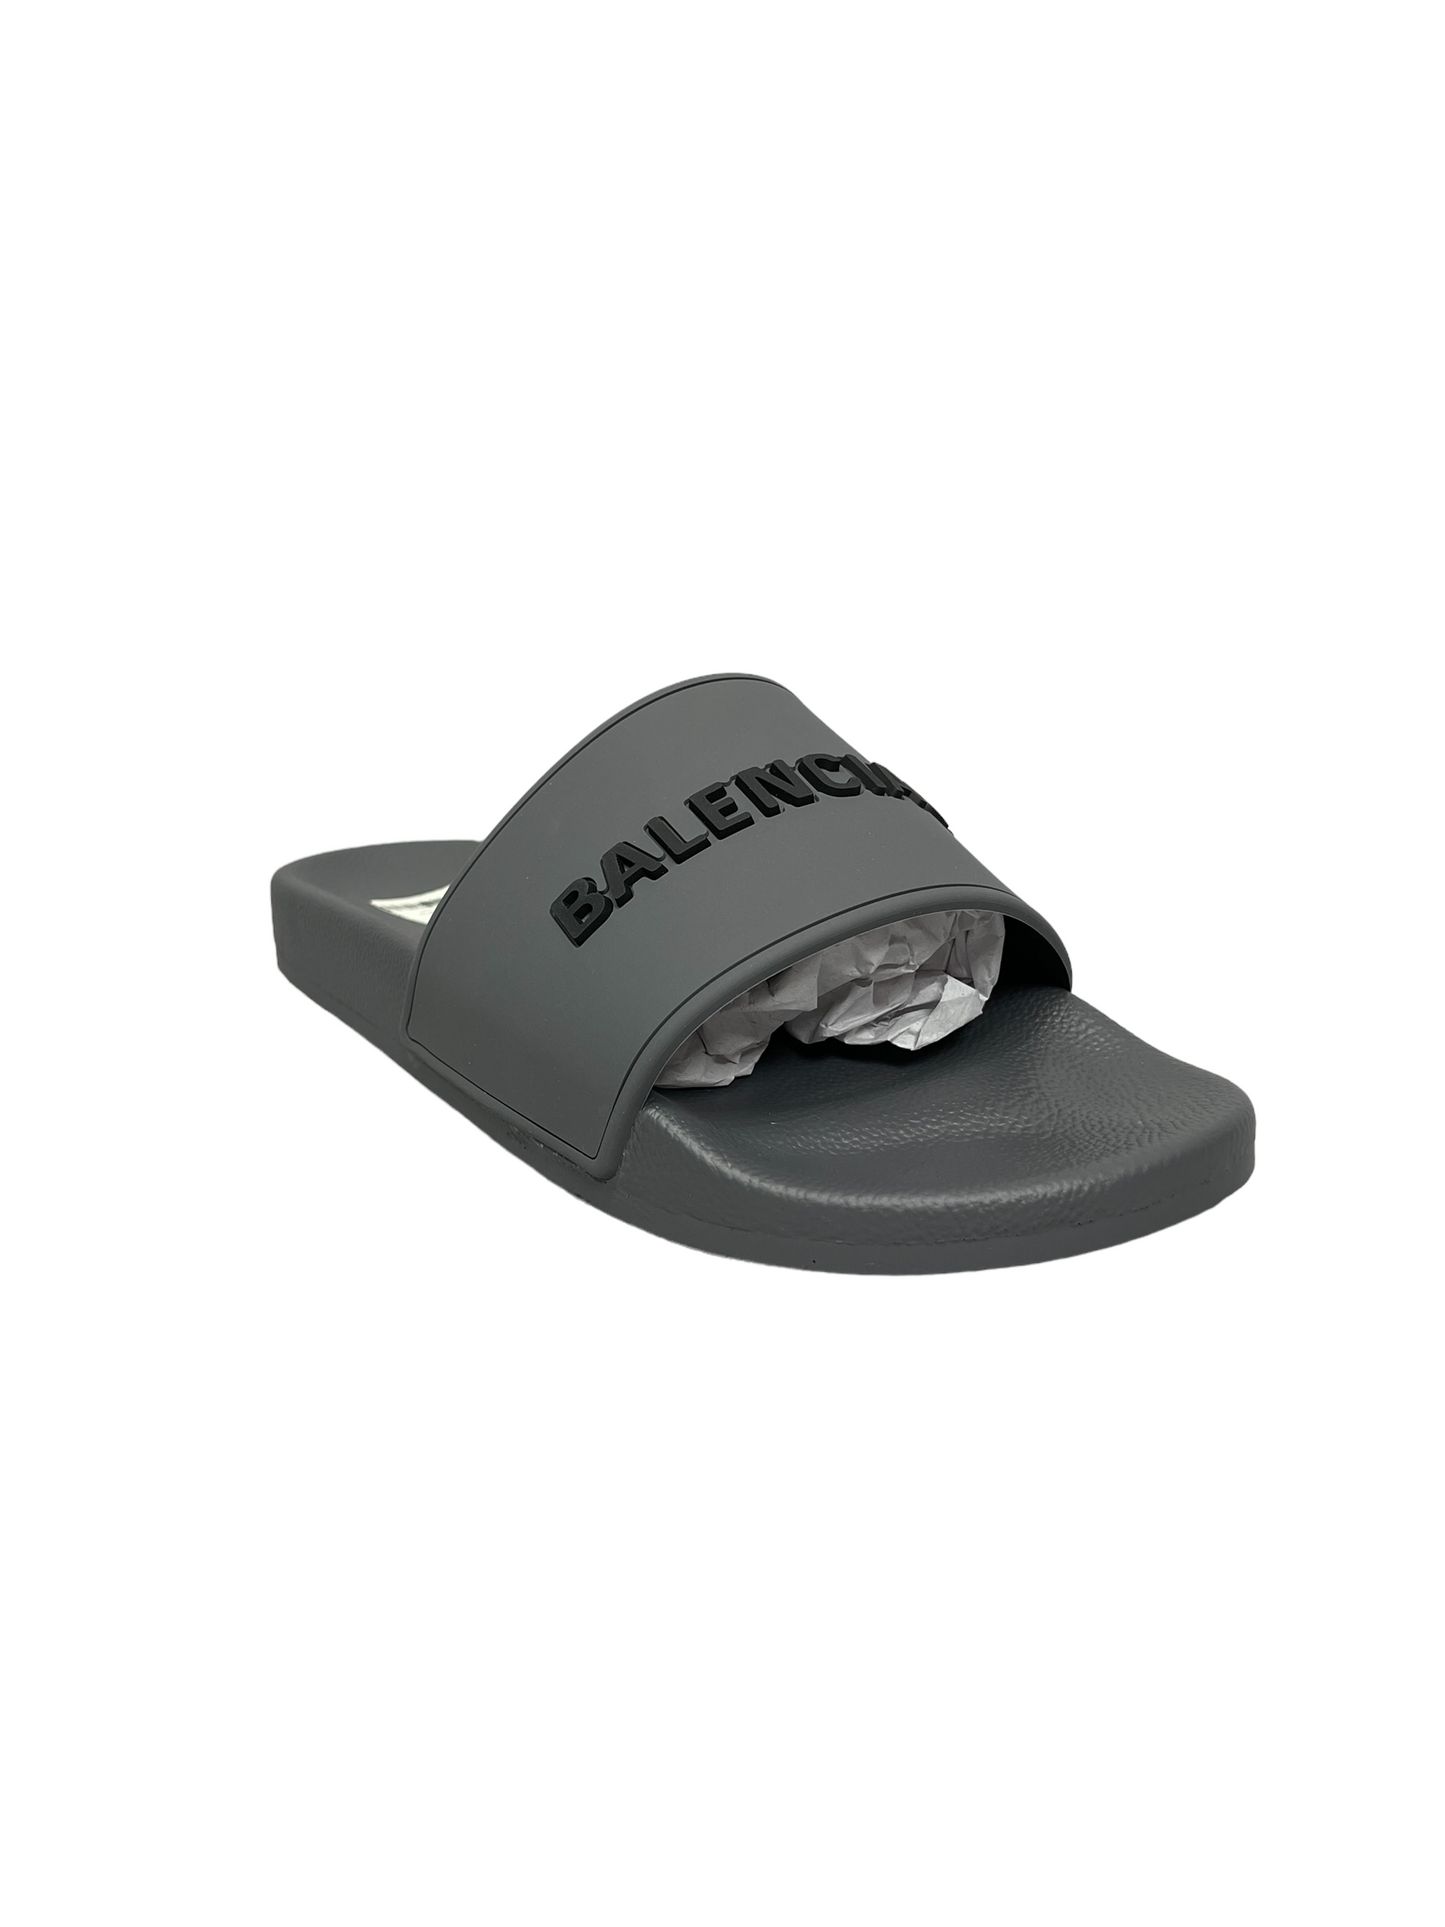 Balenciaga Charcoal Grey Raised-Logo Slides - Genuine Design Luxury Consignment for Men. New & Pre-Owned Clothing, Shoes, & Accessories. Calgary, Canada